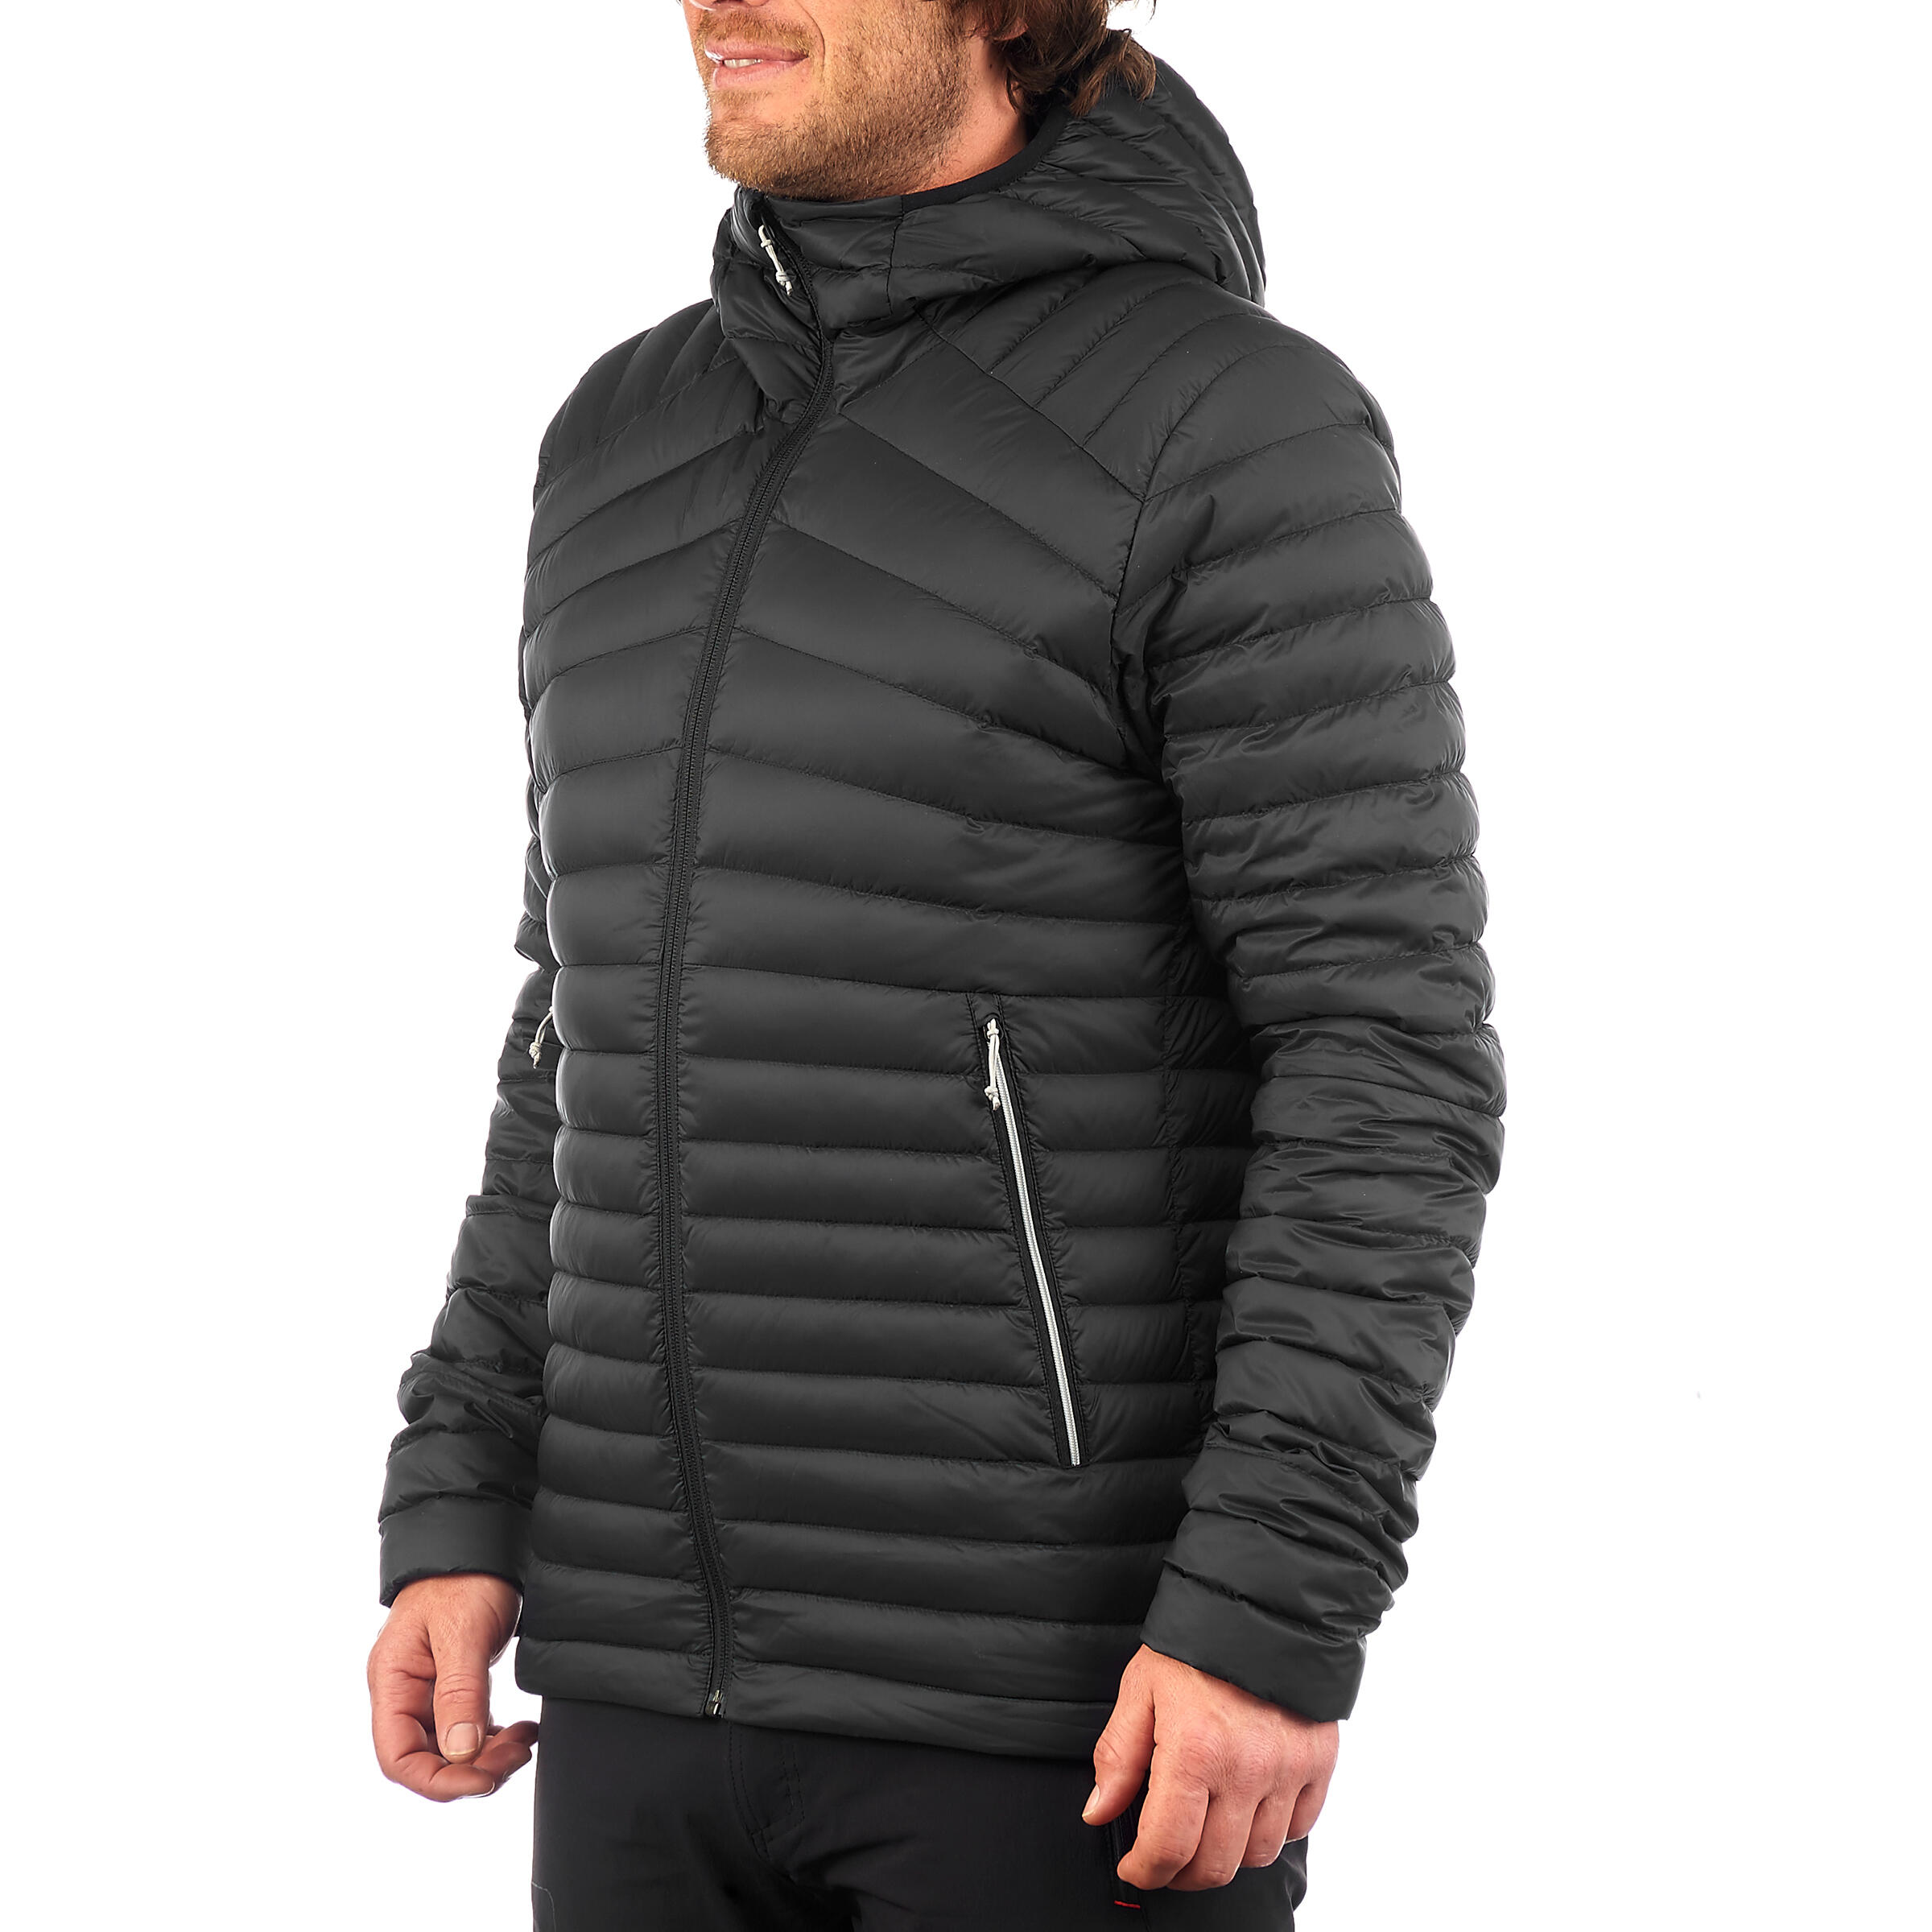 Hooded Water Resistant Windbreaker Jacket | Independent Trading Company